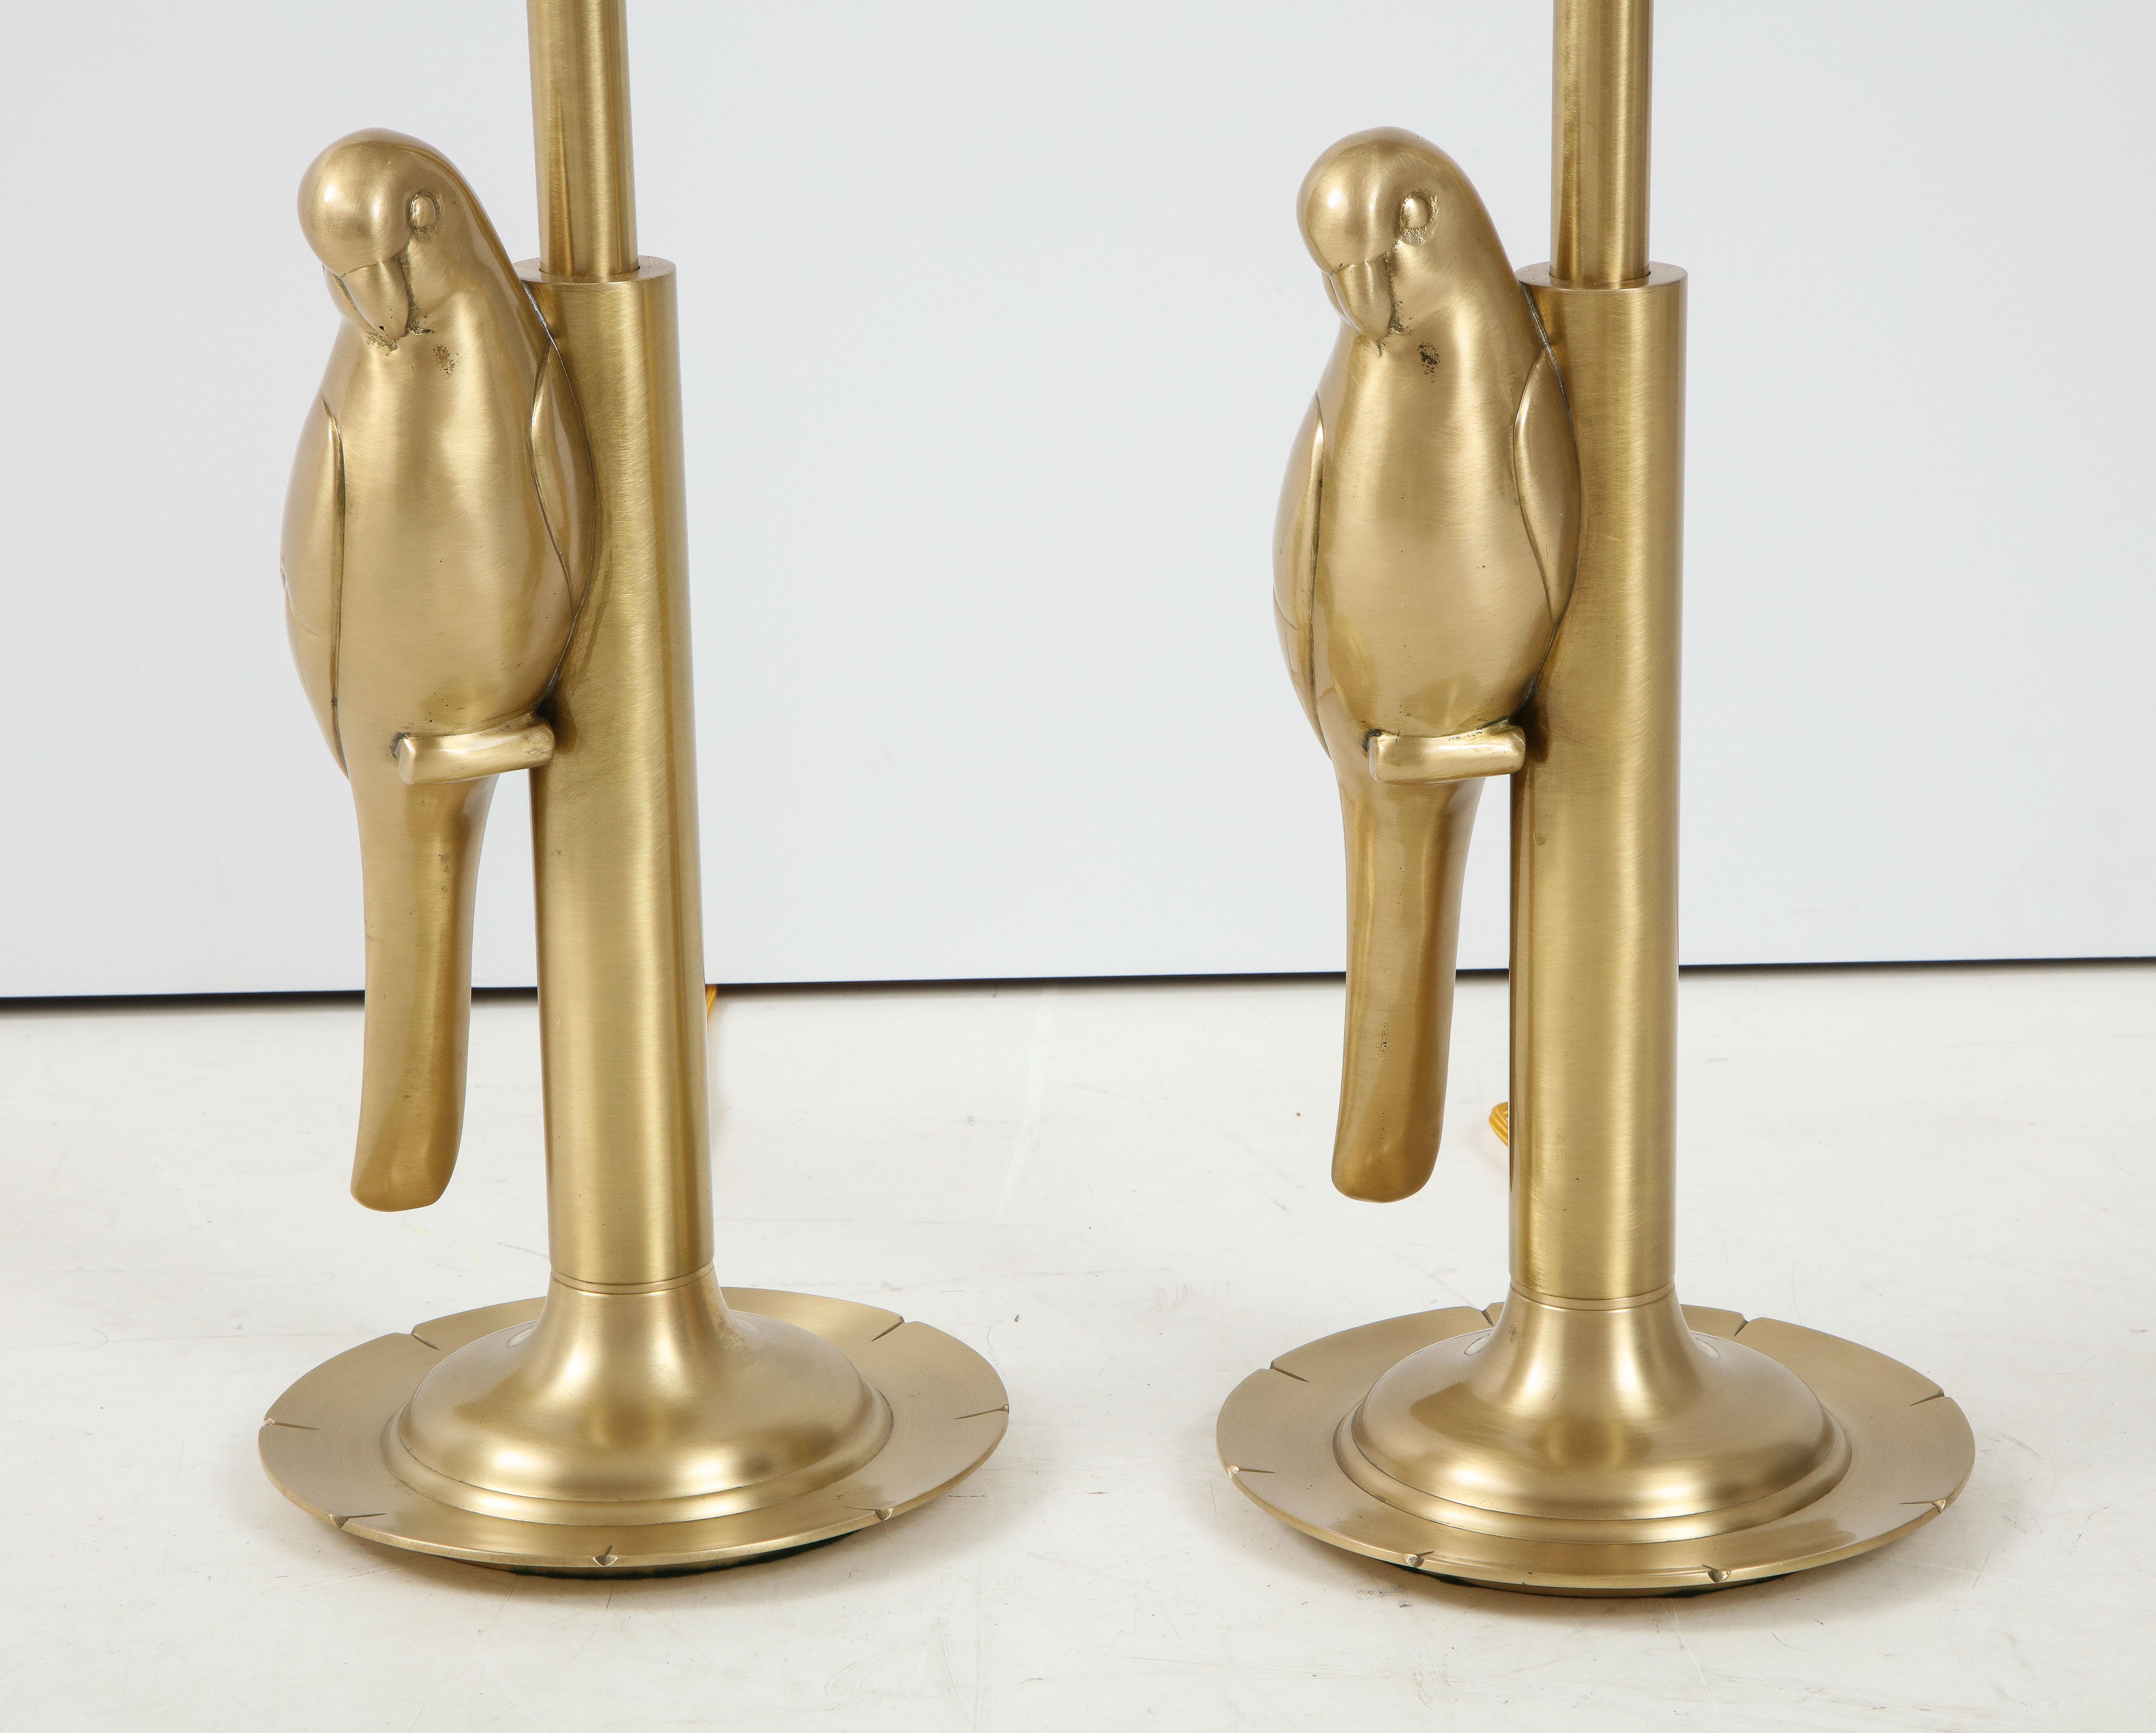 Midcentury Satin Brass Parrot Lamps In Excellent Condition For Sale In New York, NY